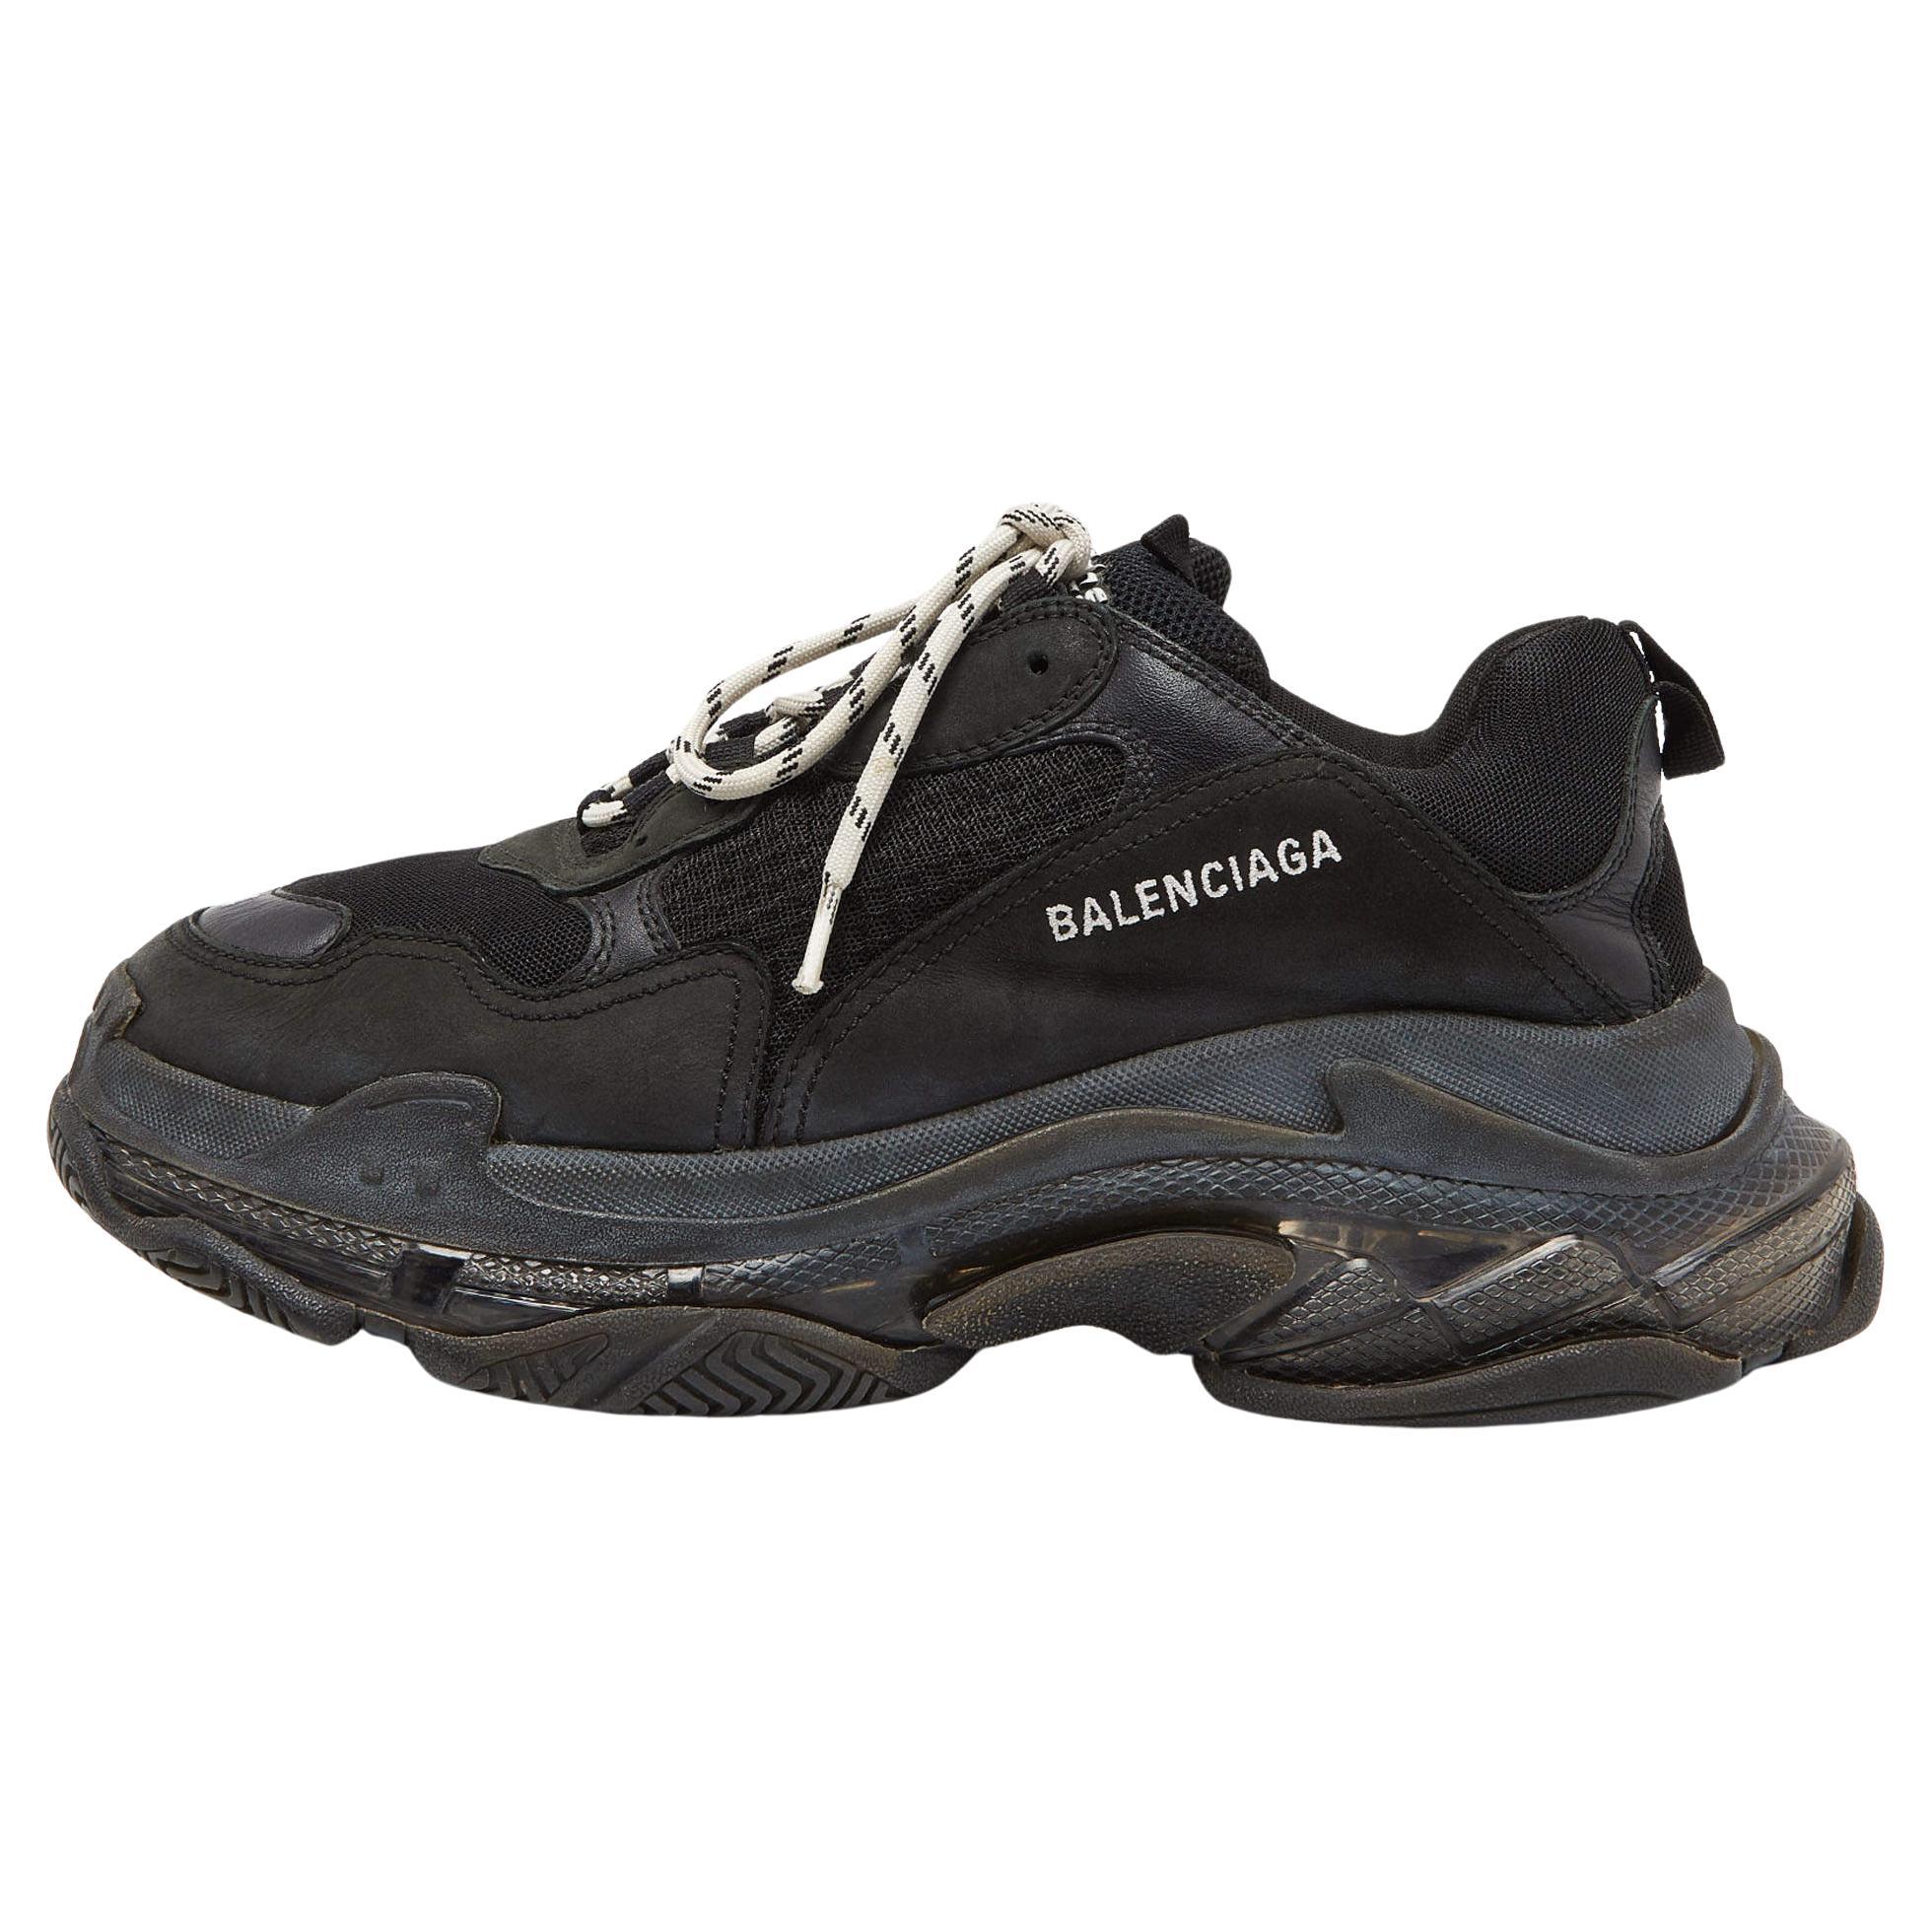 Balenciaga Black Nubuck Leather and Mesh Triple S Low Top Sneakers Size 44